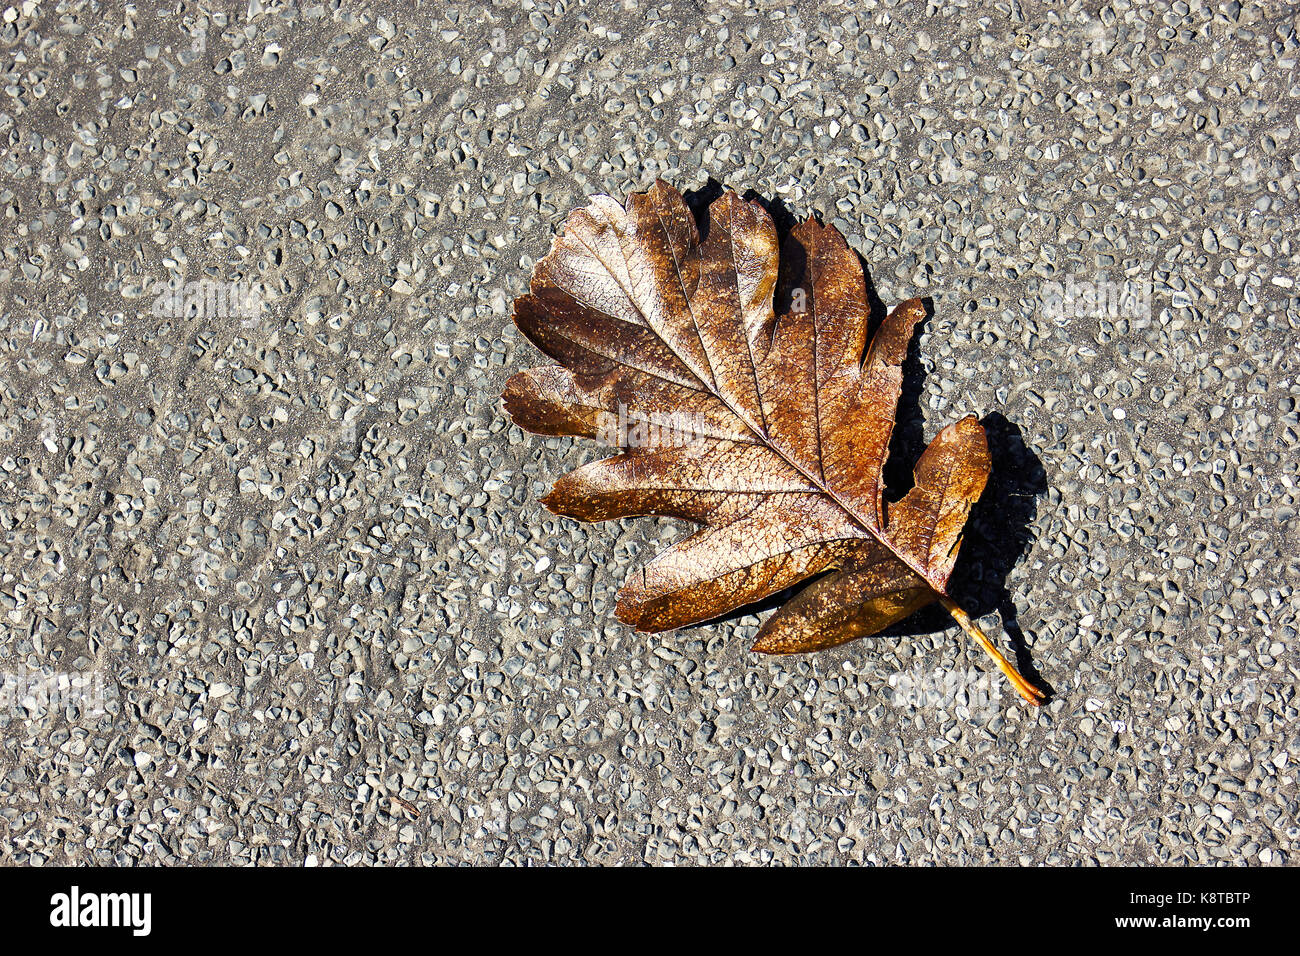 brown leaf resting on tarmac pavement Stock Photo